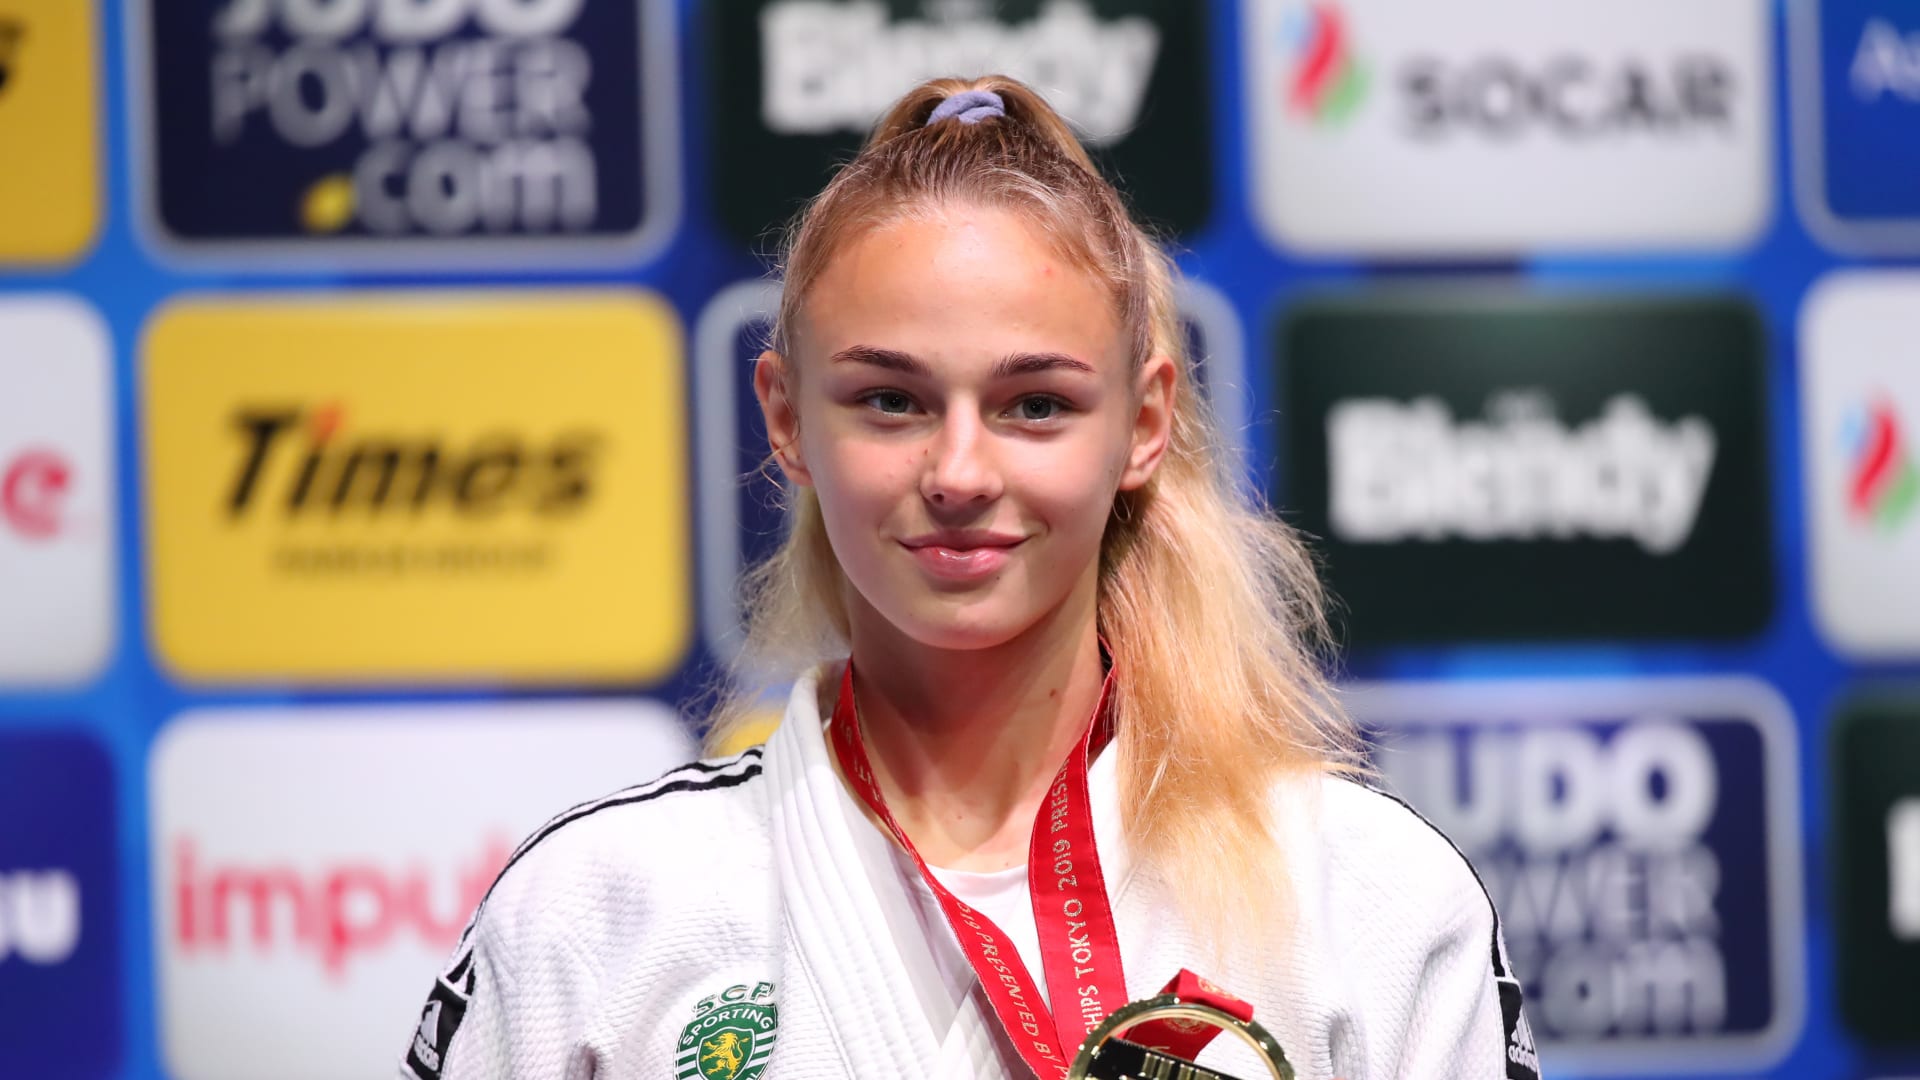 Lessons learned from the 2019 Judo World Championships